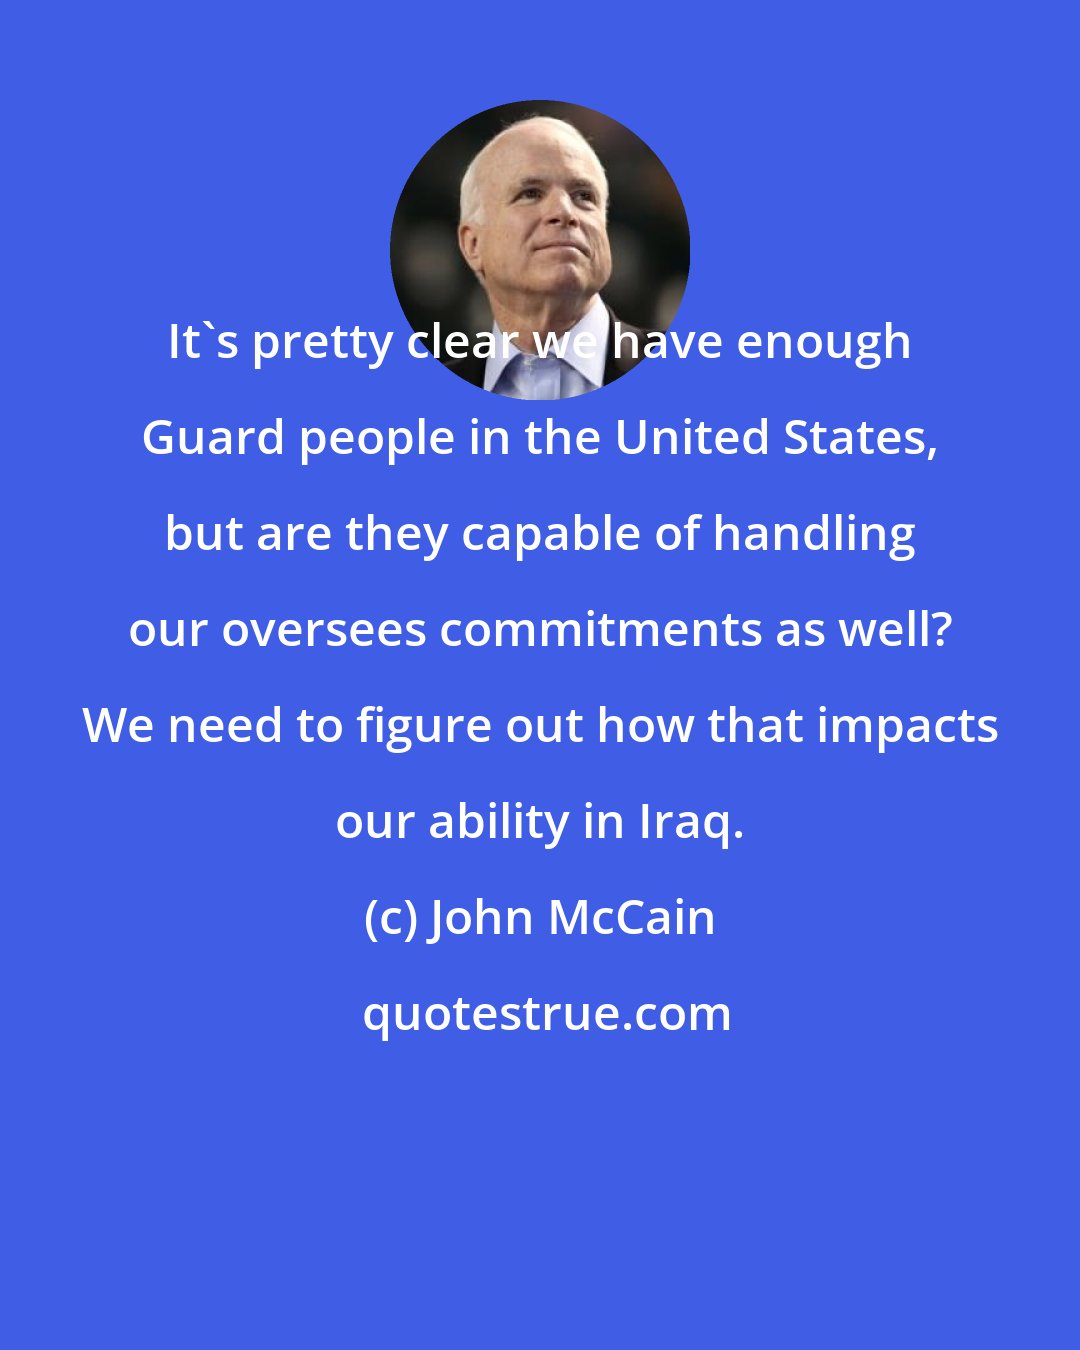 John McCain: It's pretty clear we have enough Guard people in the United States, but are they capable of handling our oversees commitments as well? We need to figure out how that impacts our ability in Iraq.